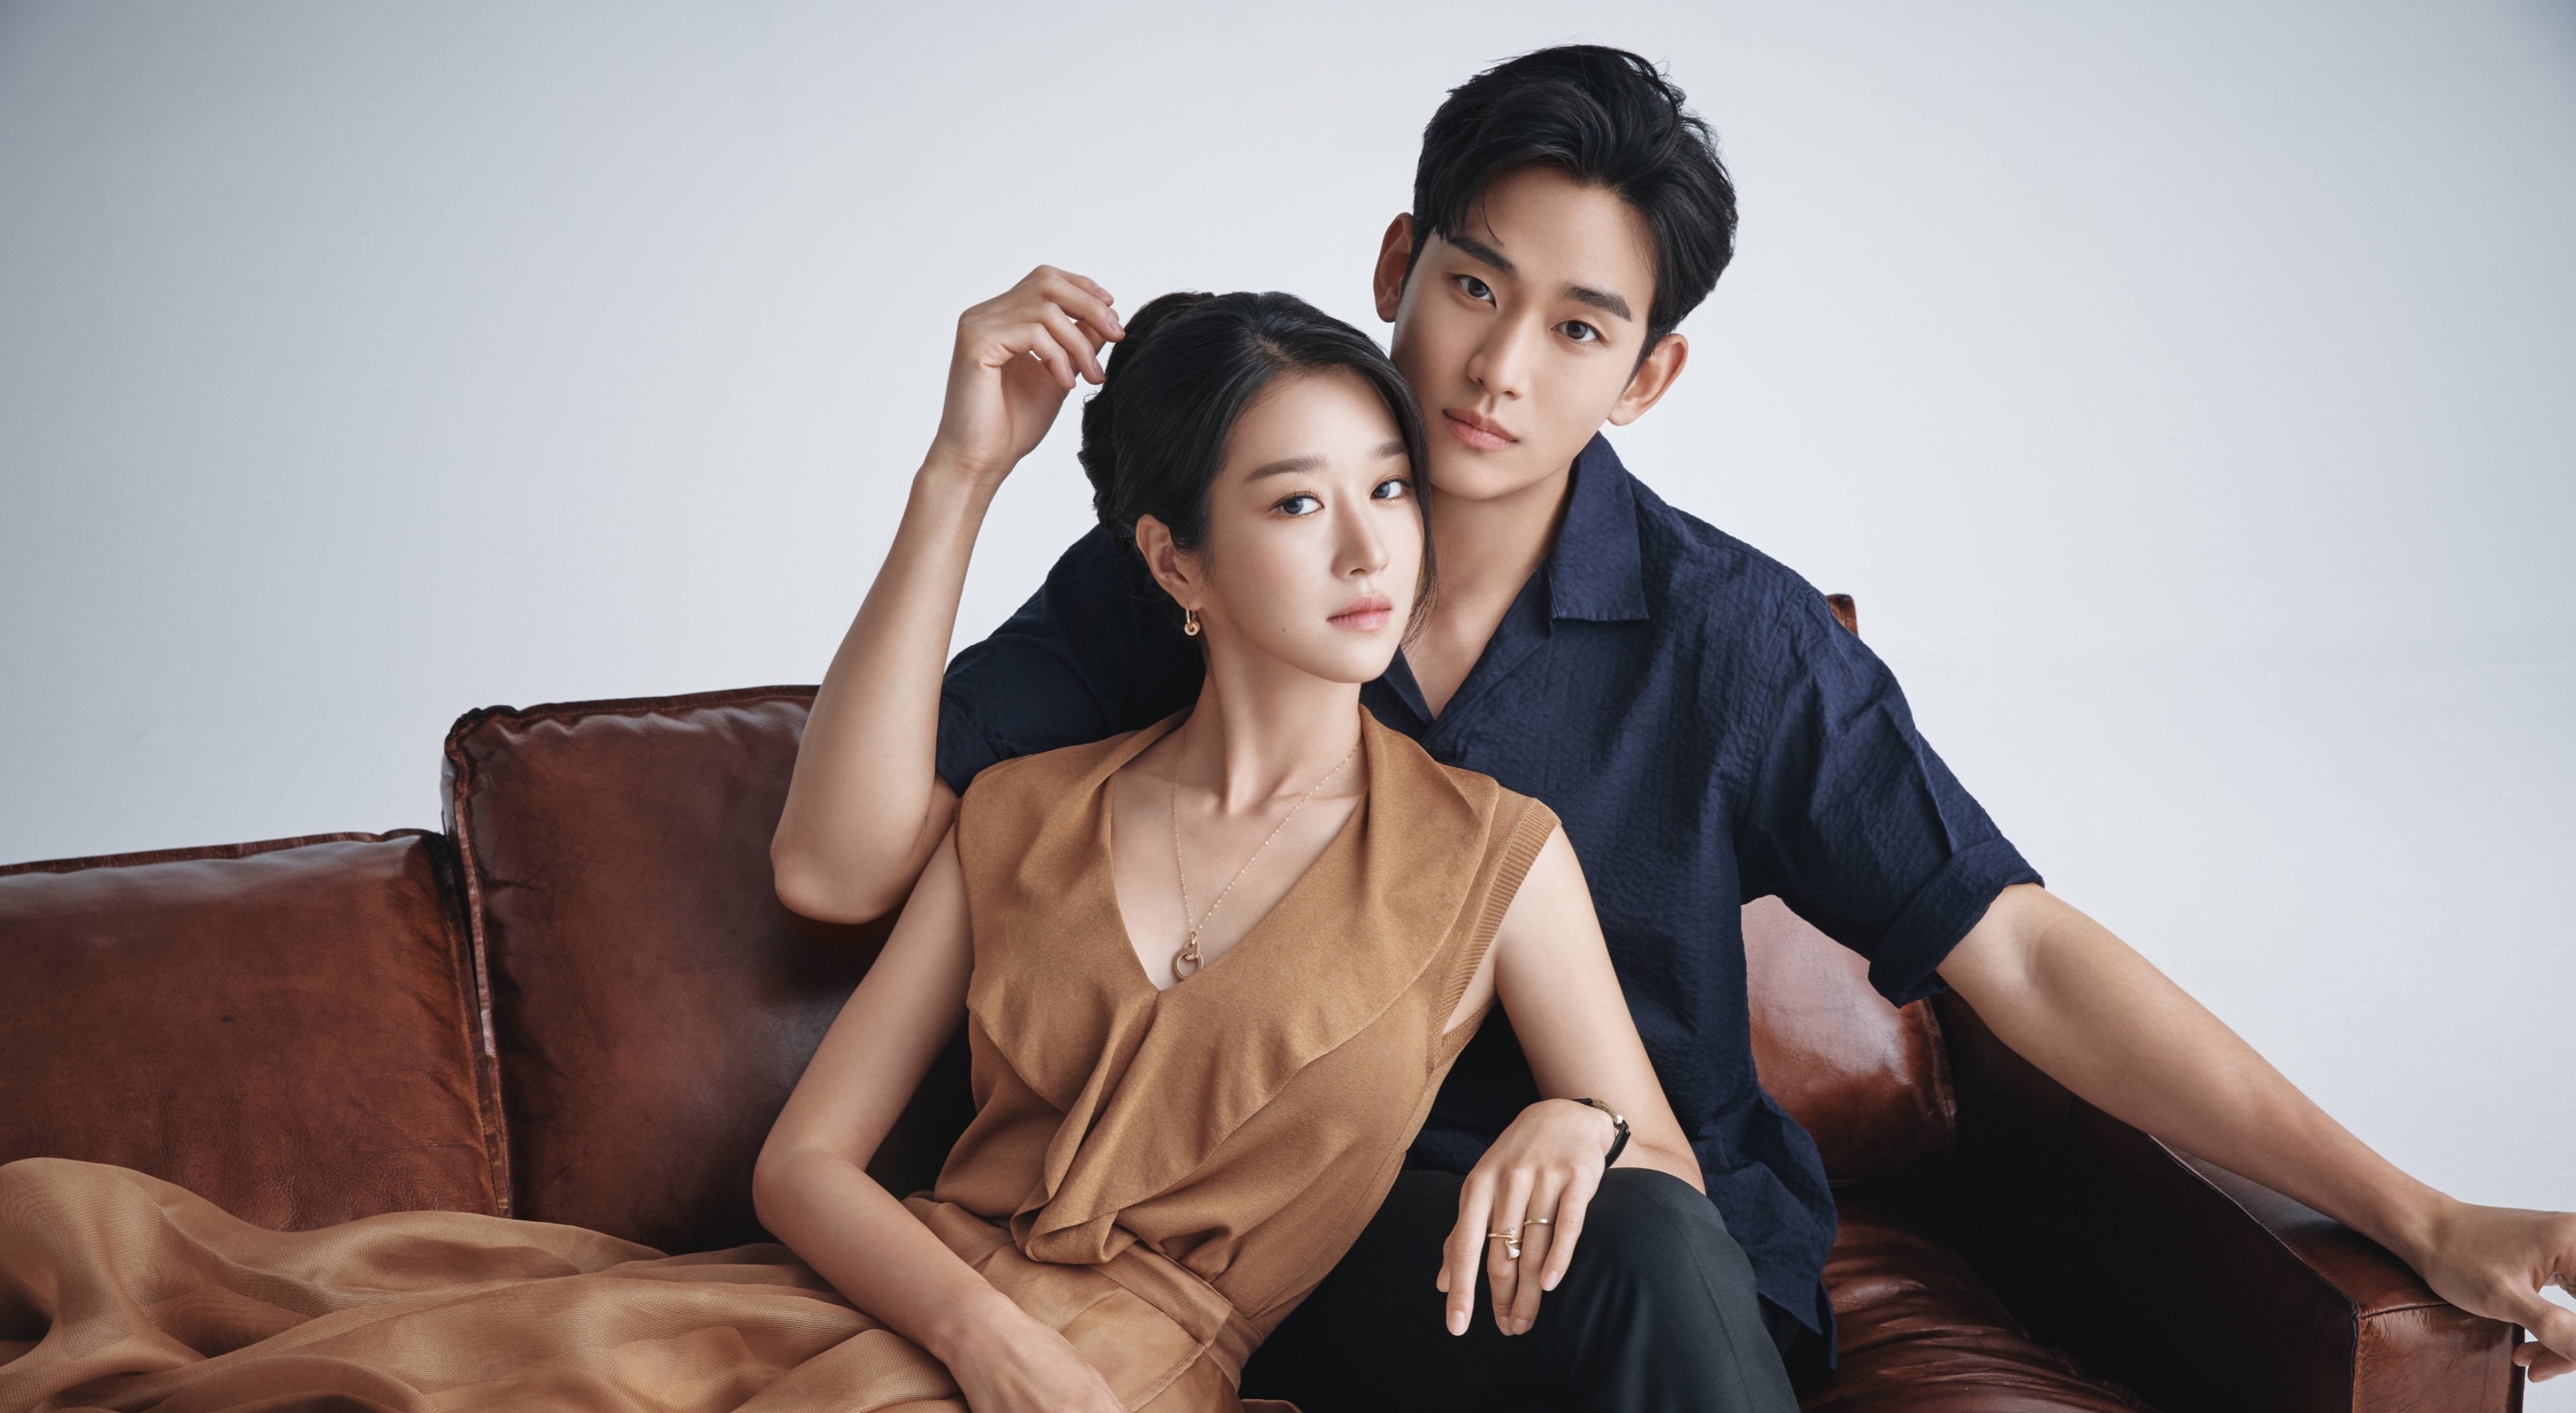 Kim Soo-Hyun and Seo Yea-Ji for 'It's Okay to Not Be Okay' wearing brown dress and black suit on leather couch.